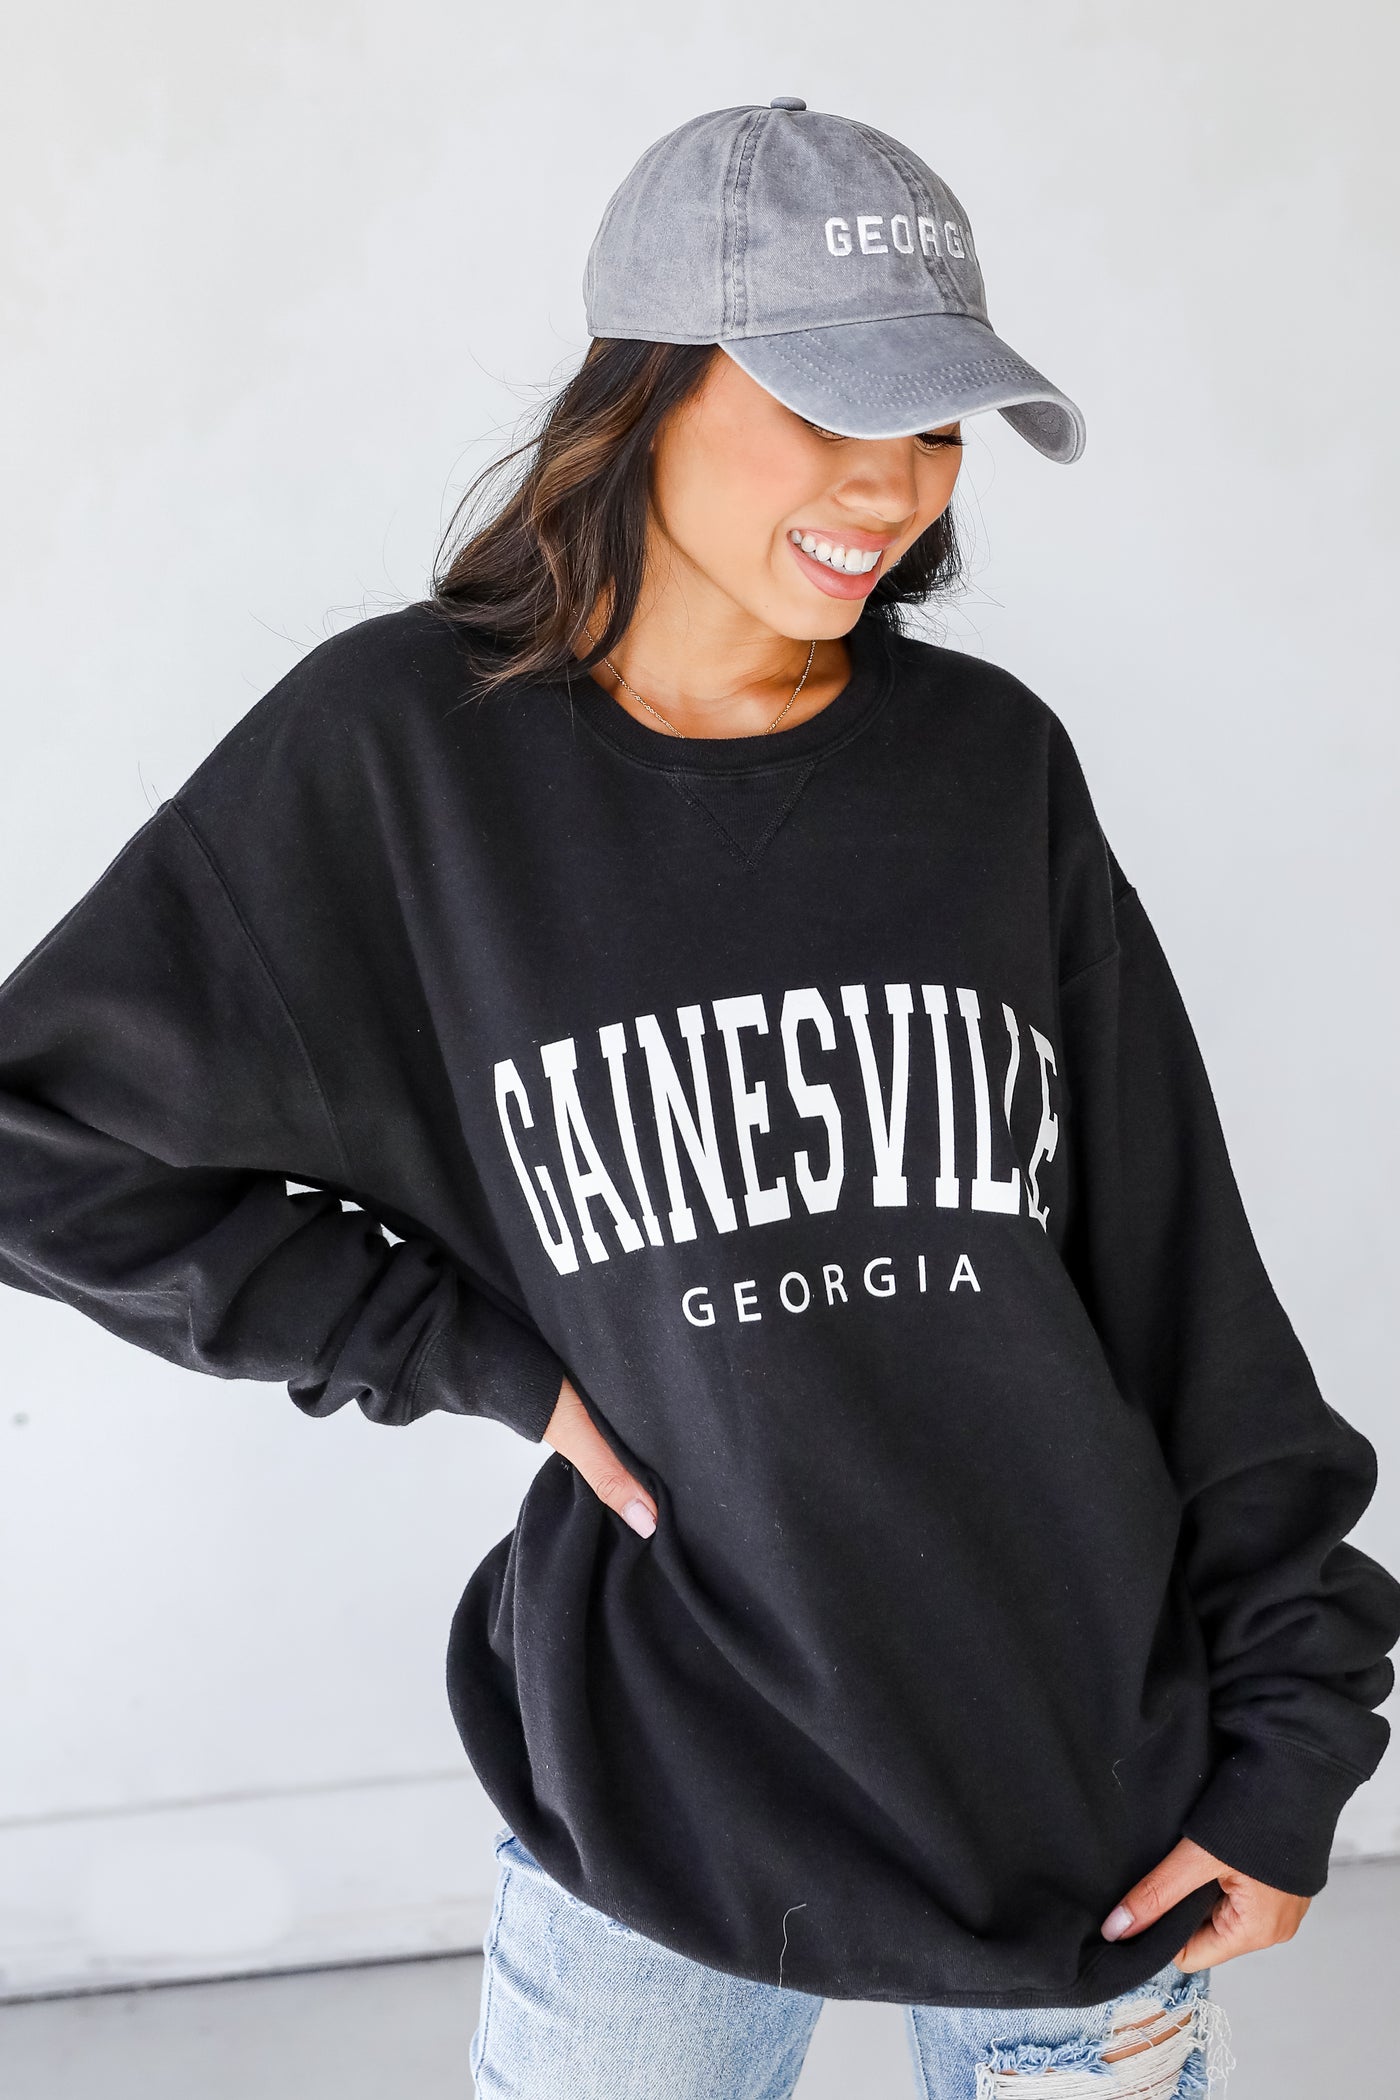 Gainesville Georgia Pullover from dress up